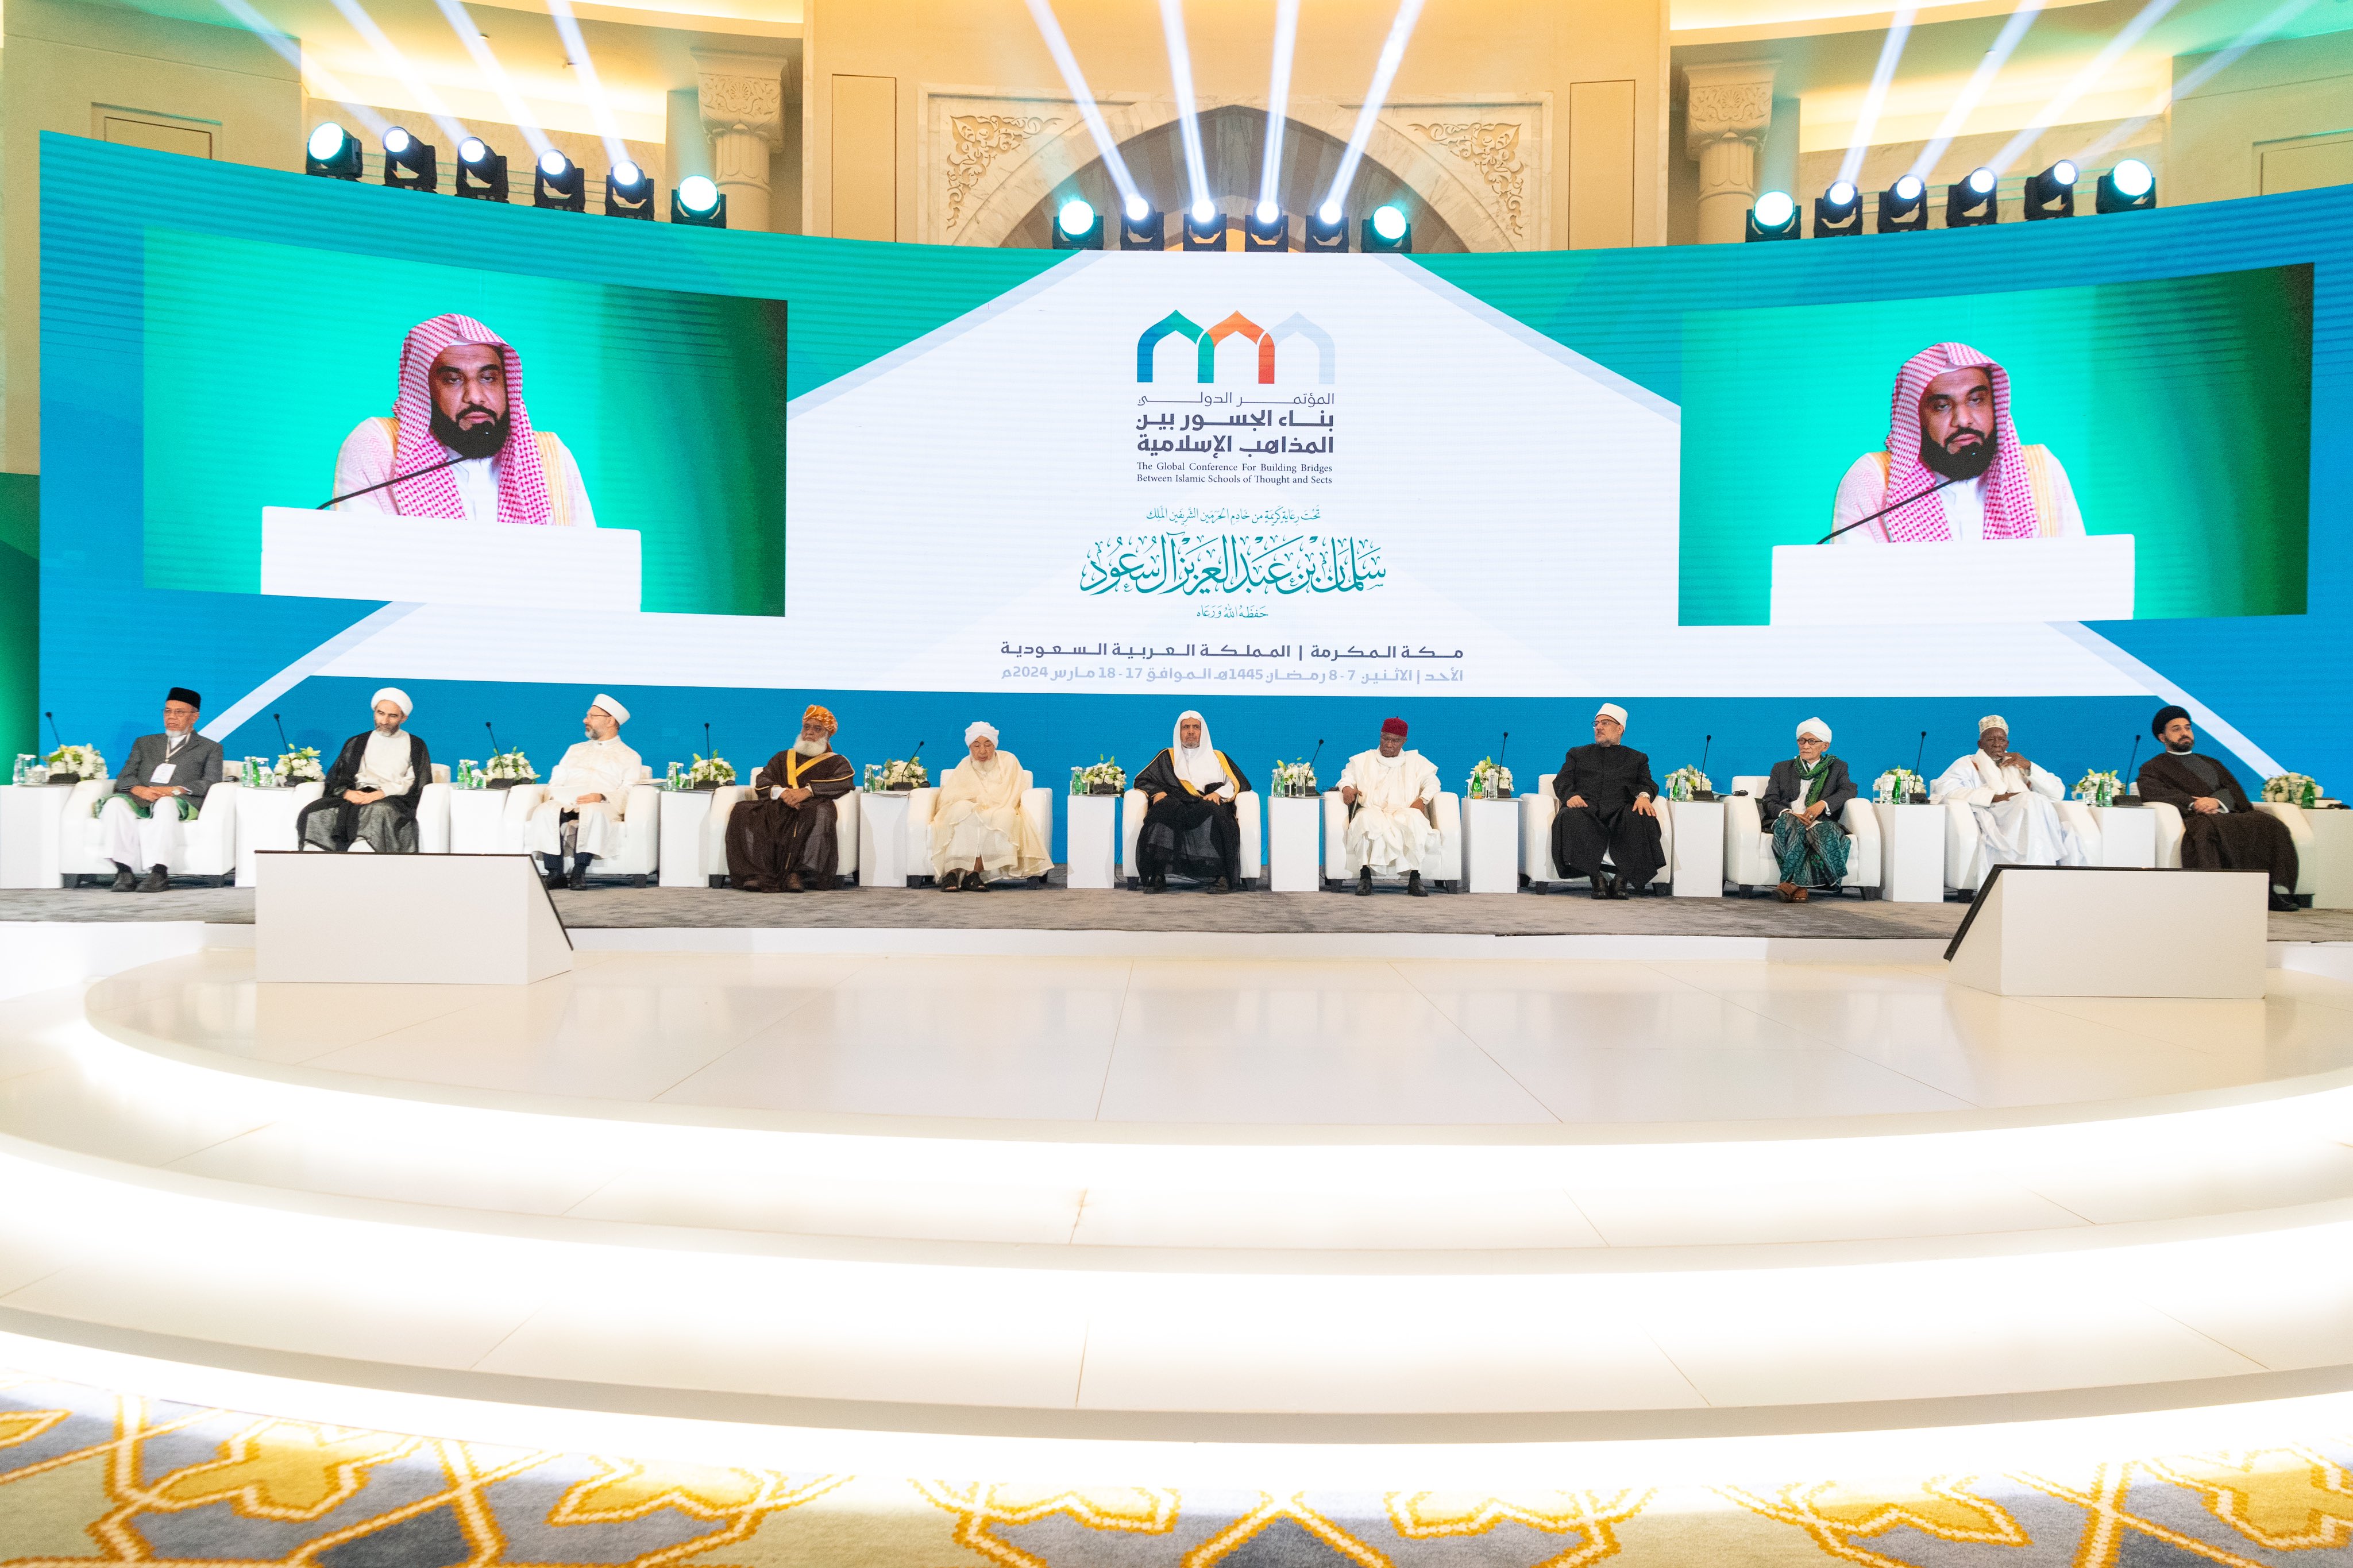 “To Resolve Confusion on Major Ummah Issues”  This statement reaffirms the dual objectives of the conferences: to foster understanding and cooperation among Islamic sects towards achieving shared objectives